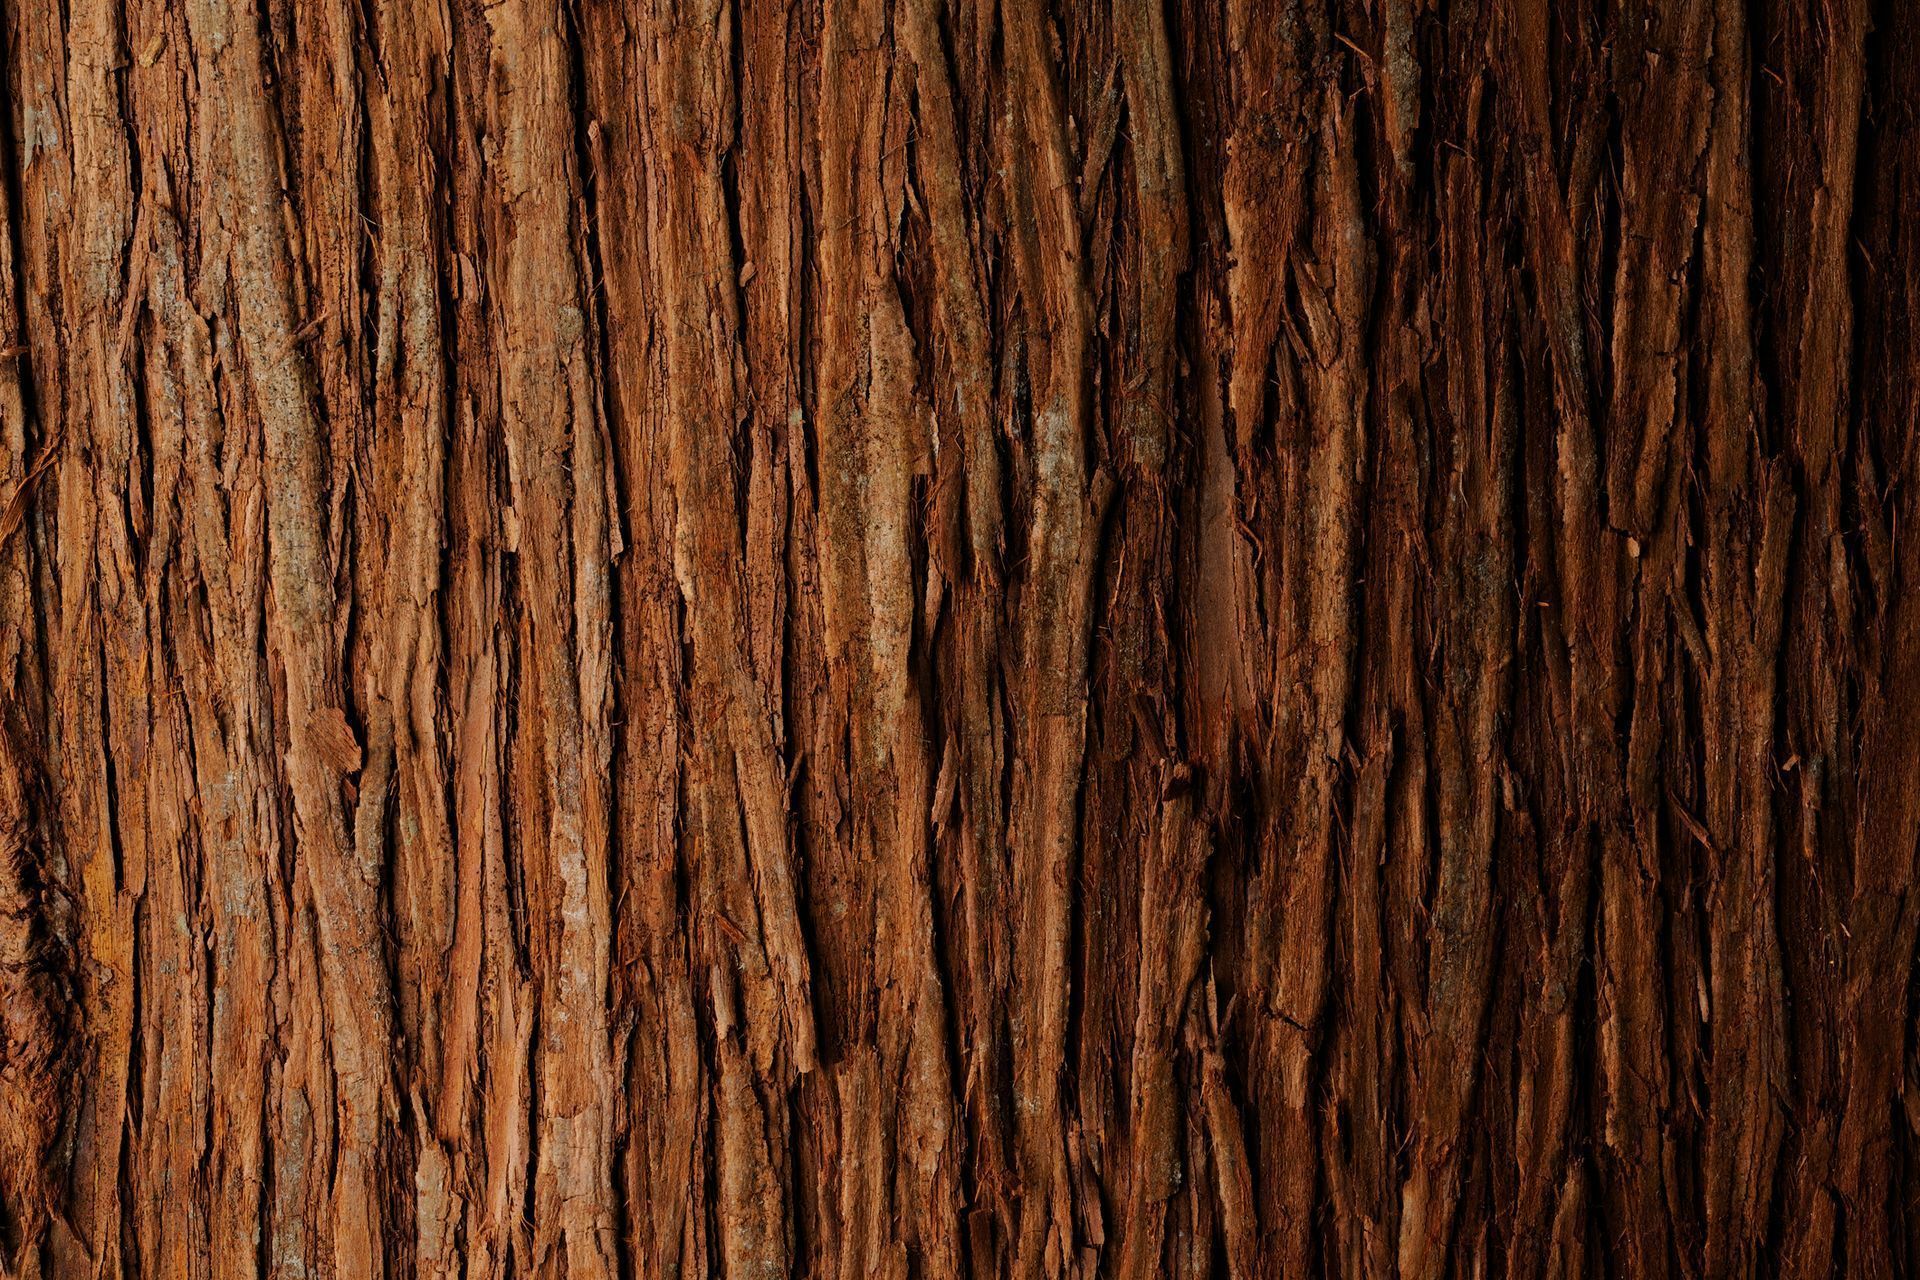 A close-up of a Tree Trunk showing the texture of the Wood - Kokomo. IN - Austin Tree Care